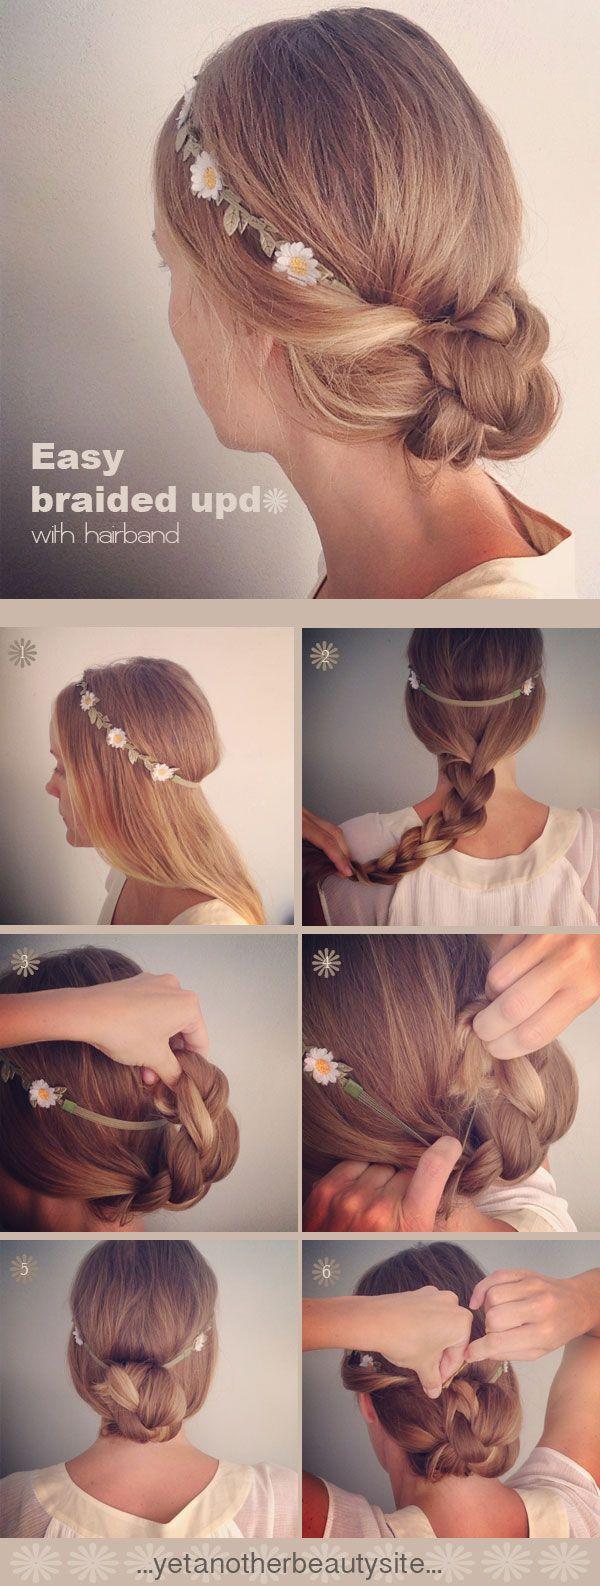 Wedding - 20 DIY Wedding Hairstyles With Tutorials To Try On Your Own